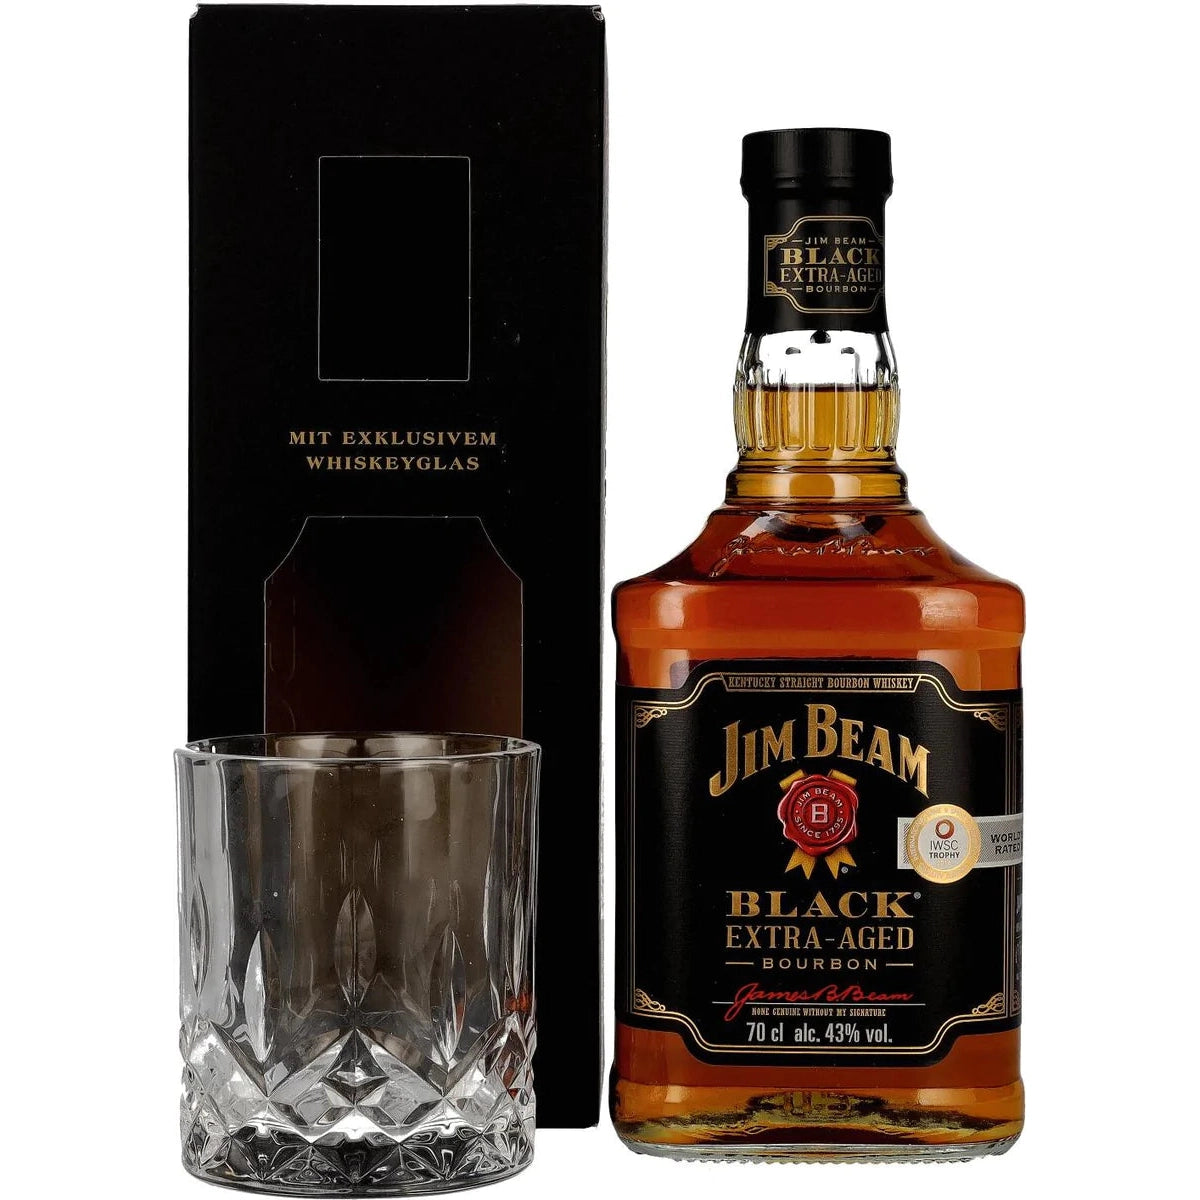 Bourbon in Giftbox 43% with BLACK Vol. glass Jim Beam 0,7l Extra-Aged